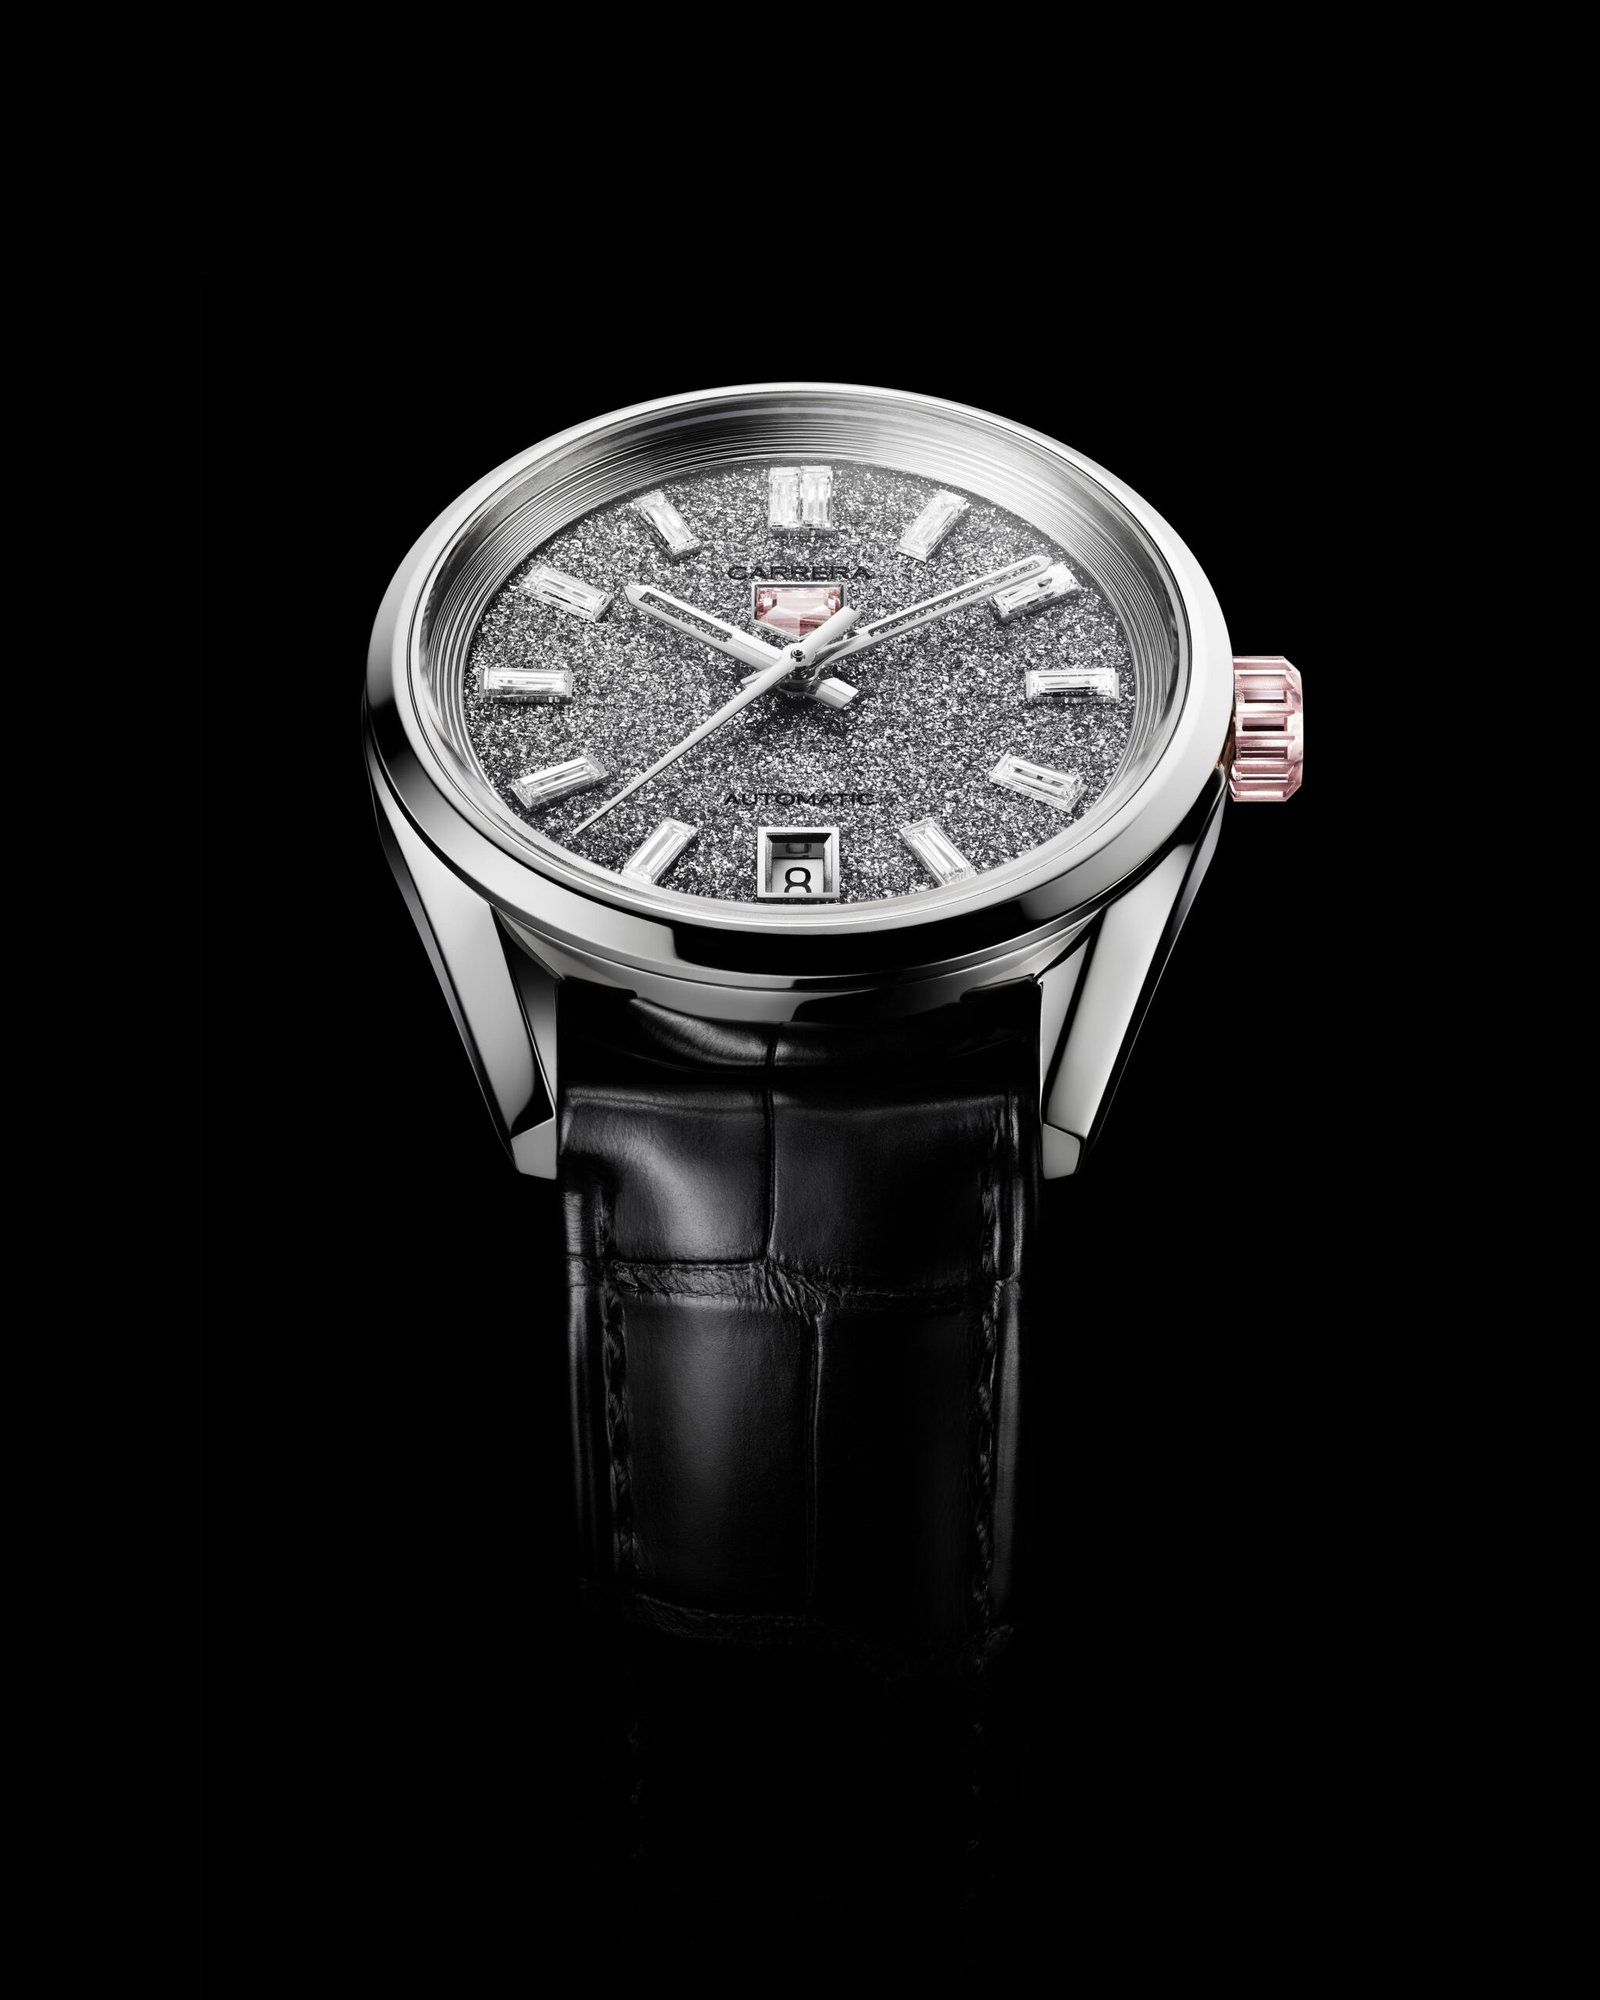 The watch features a 36mm white gold case with a 2.9-carat dial design